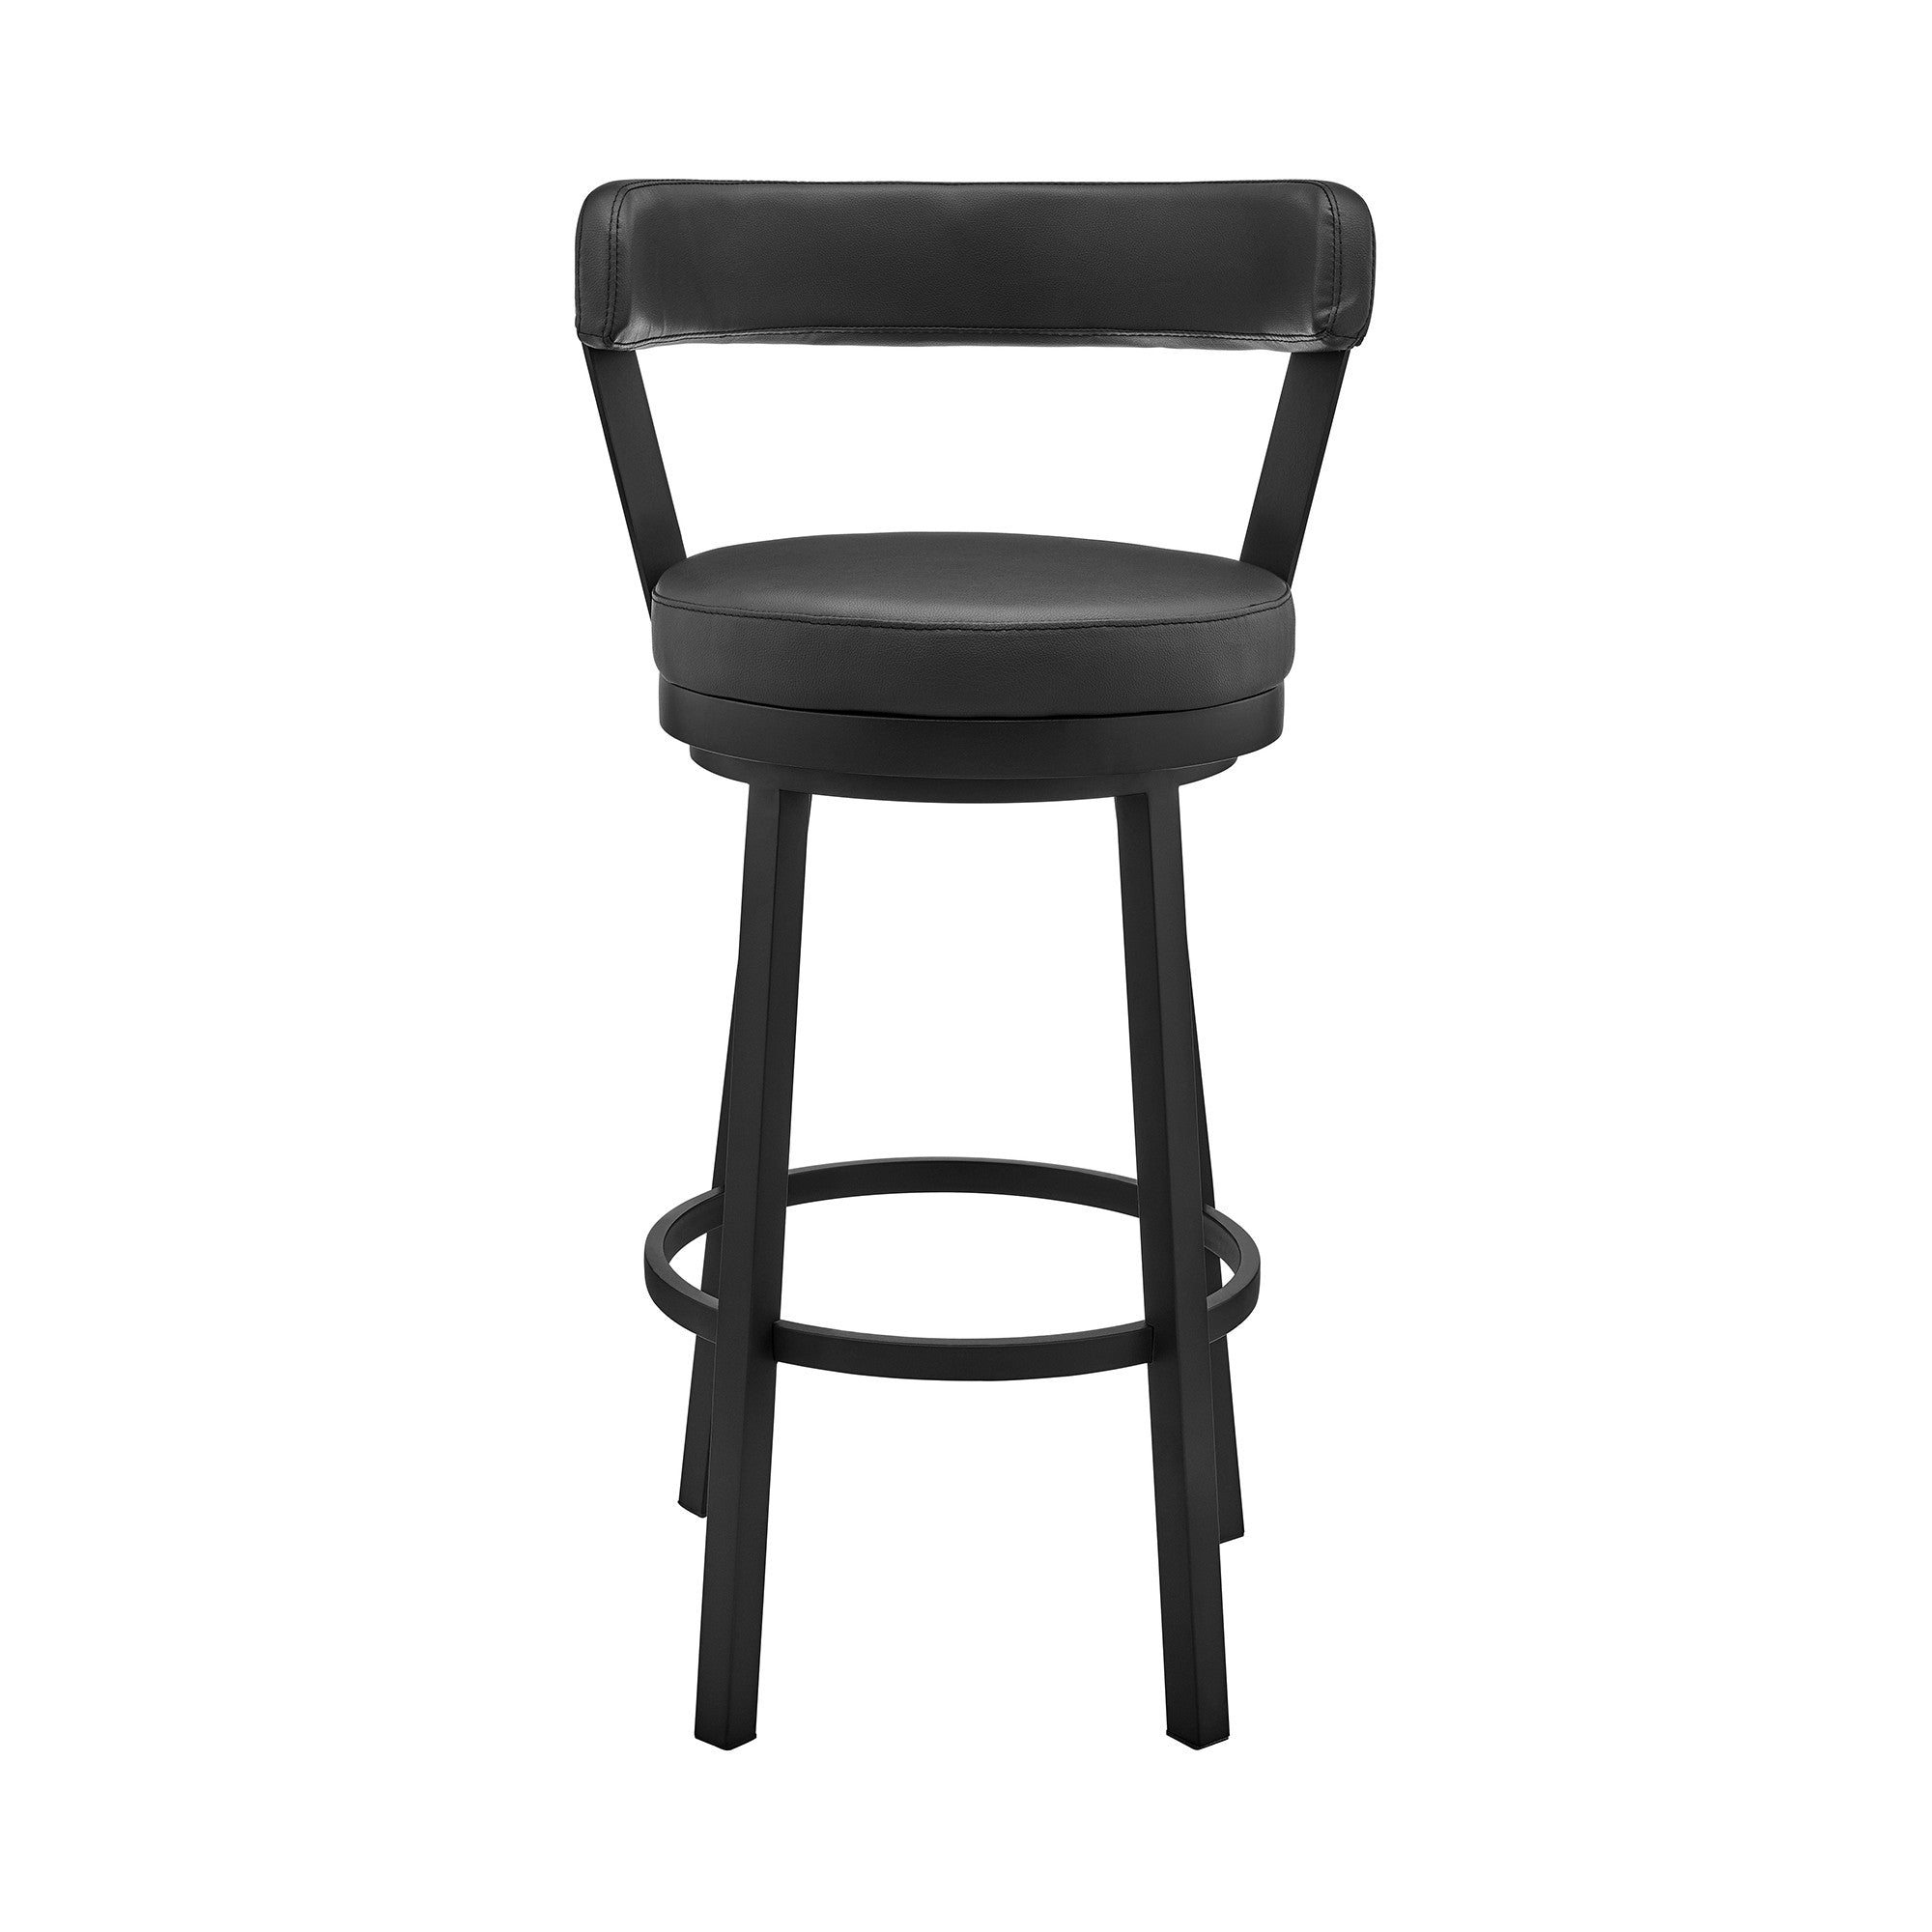 30" Black Faux Leather And Steel Swivel Low Back Bar Height Bar Chair